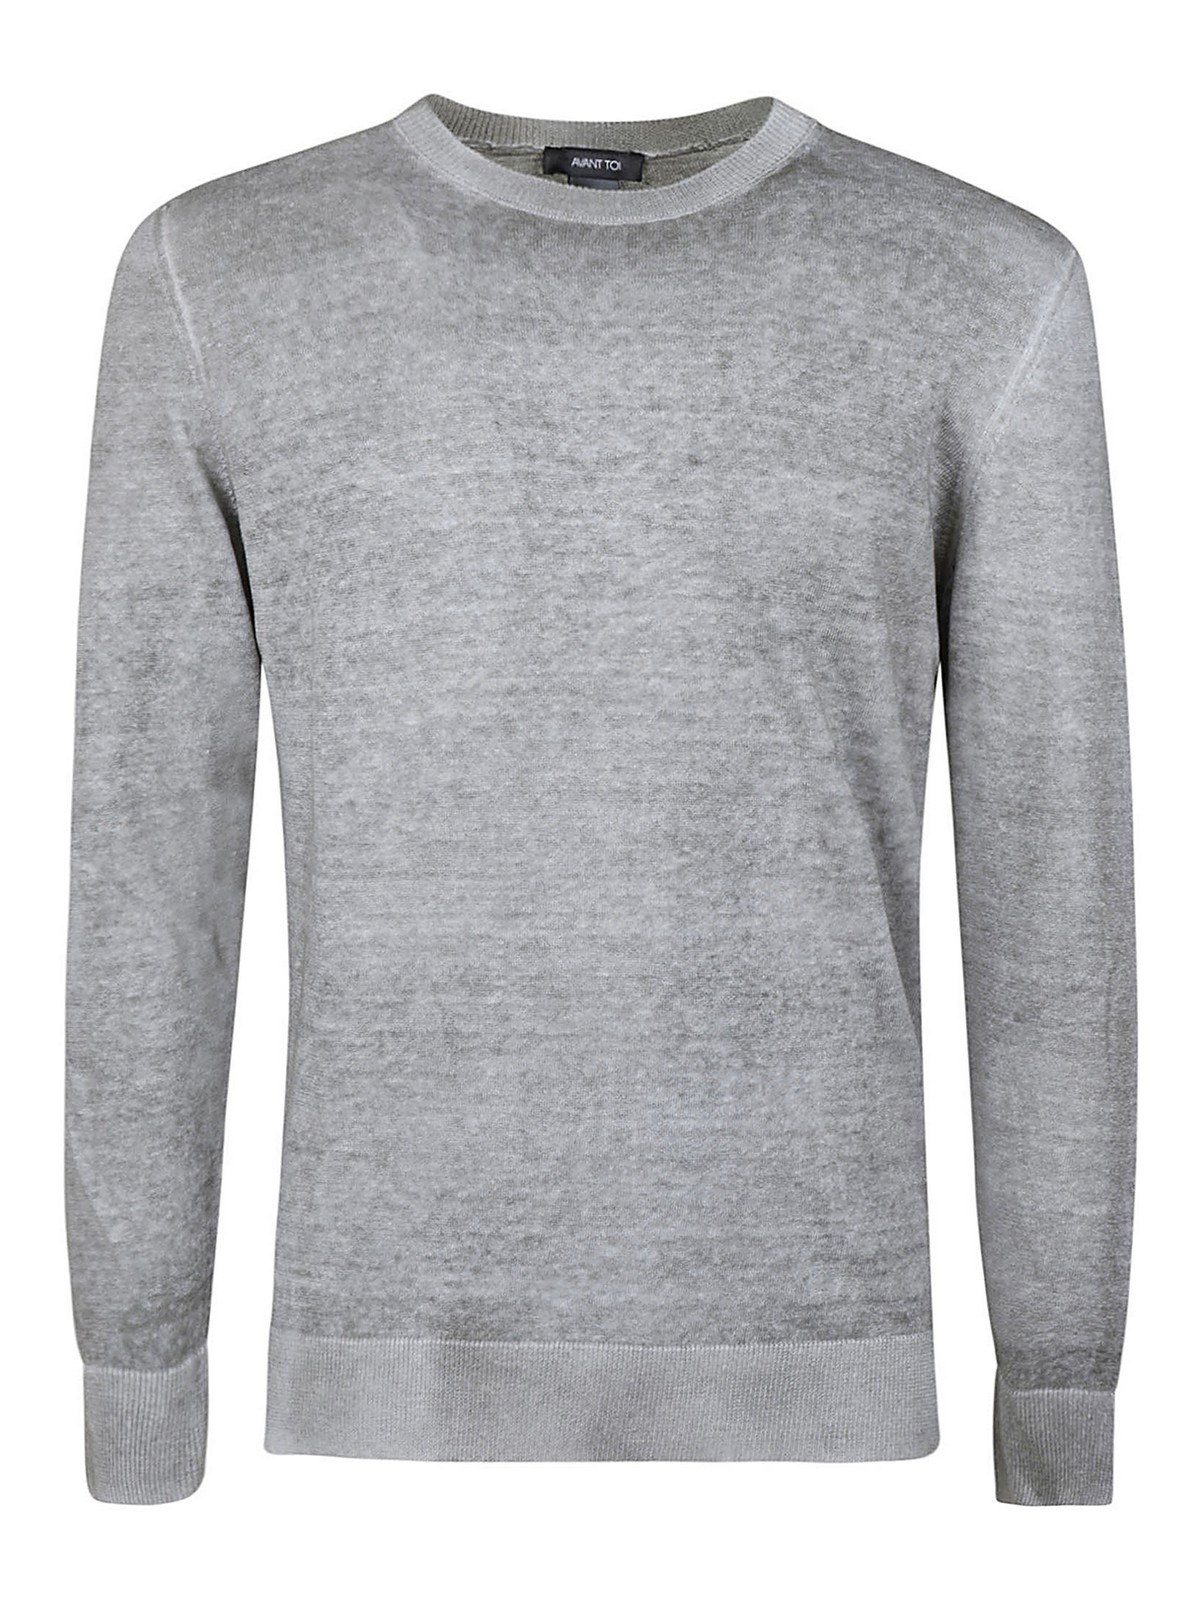 Avant Toi Ribbed Cuffs Linen Blend Crewneck In Grey